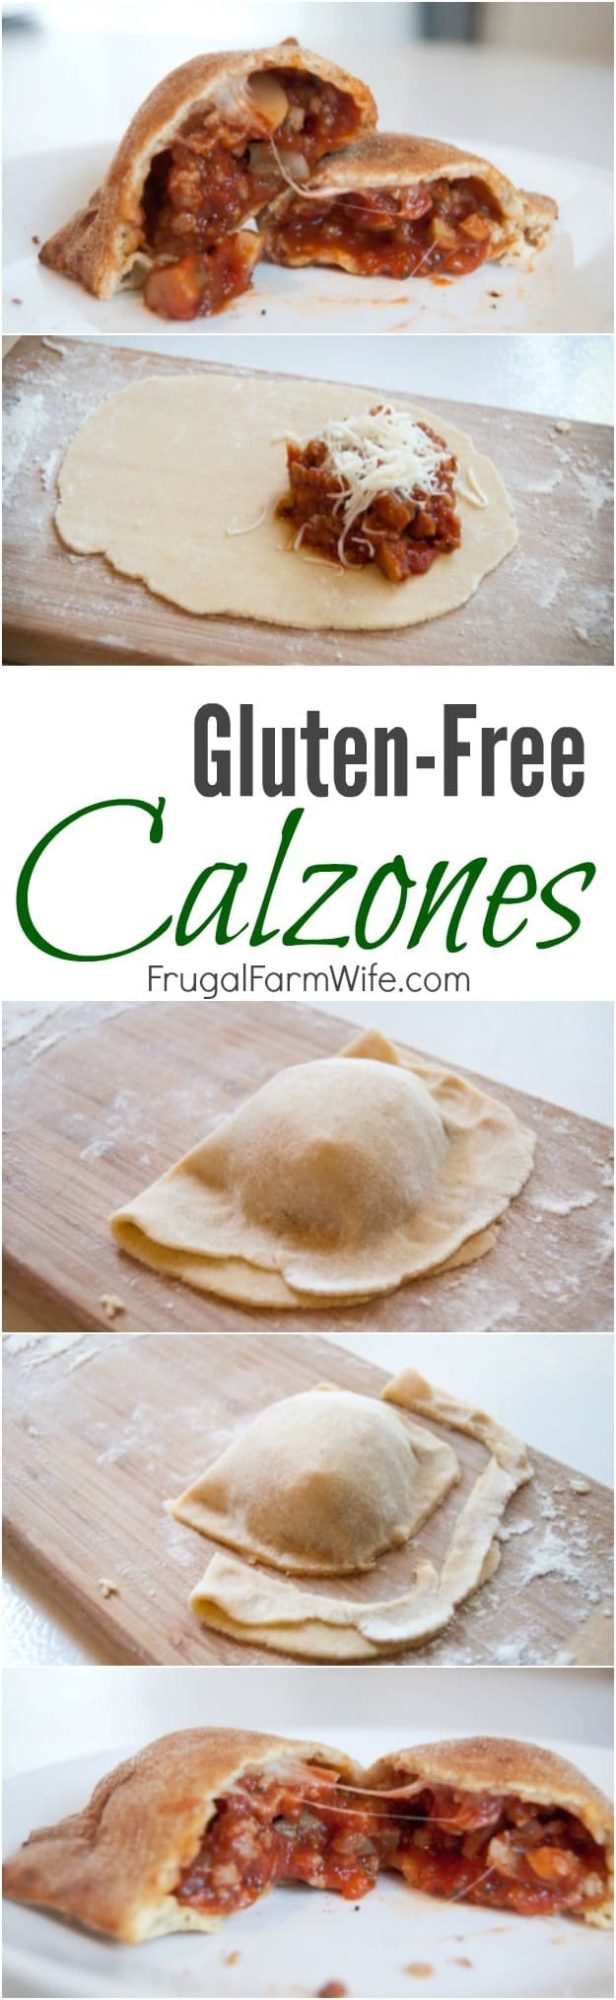 Image shows a collage depicting how to make calzones with text that reads "gluten-free calzones"